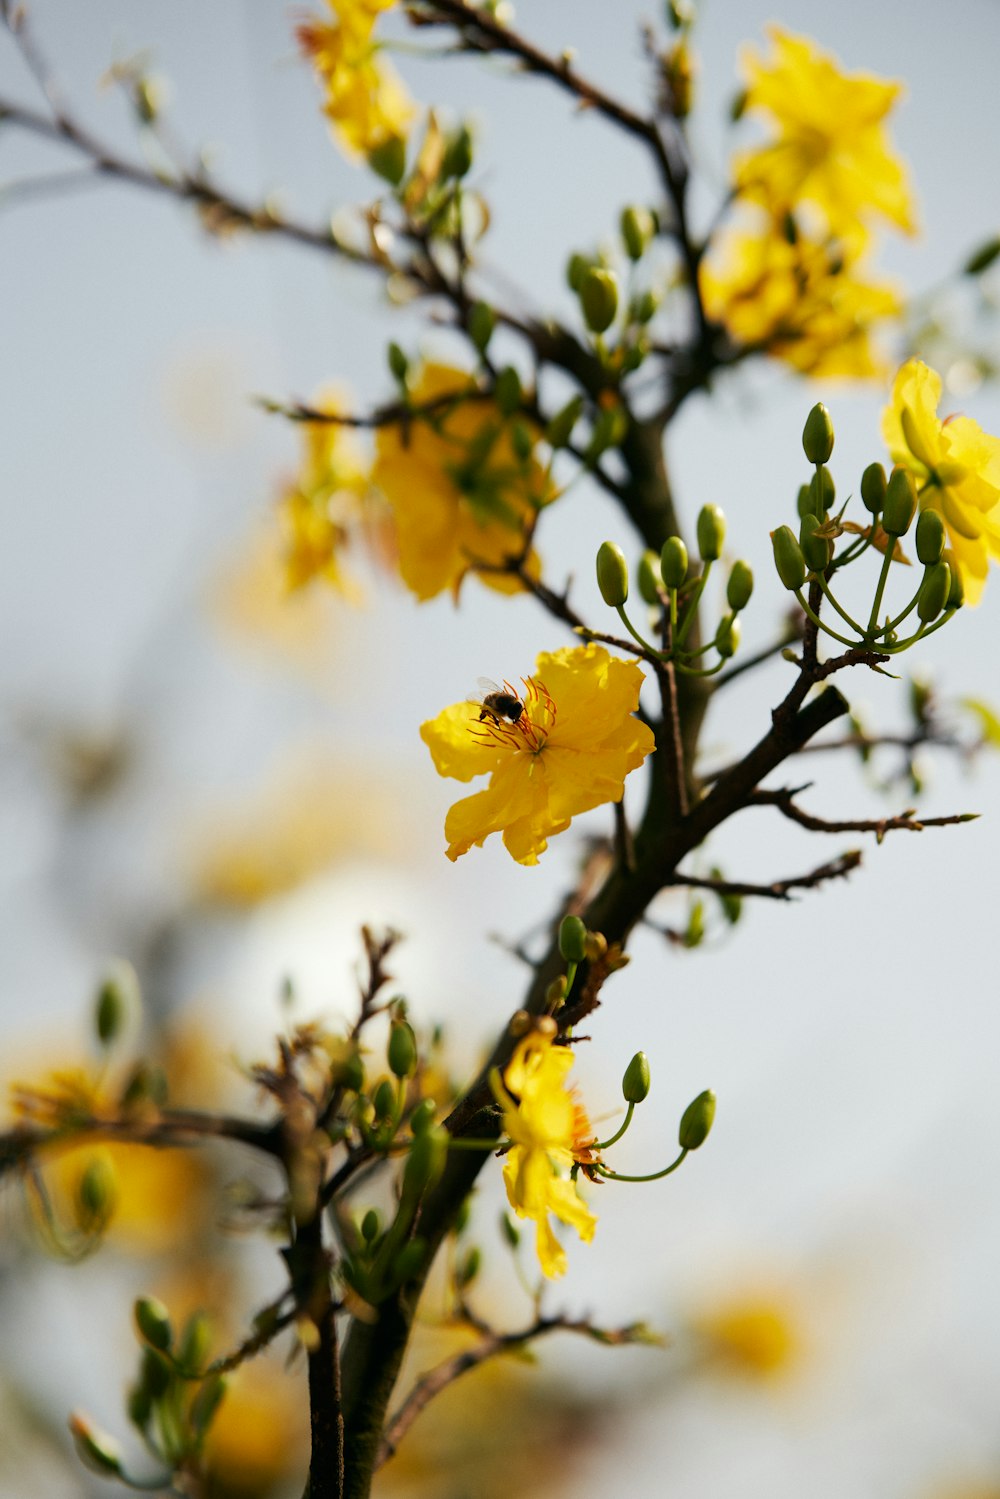 a branch with yellow flowers against a blue sky